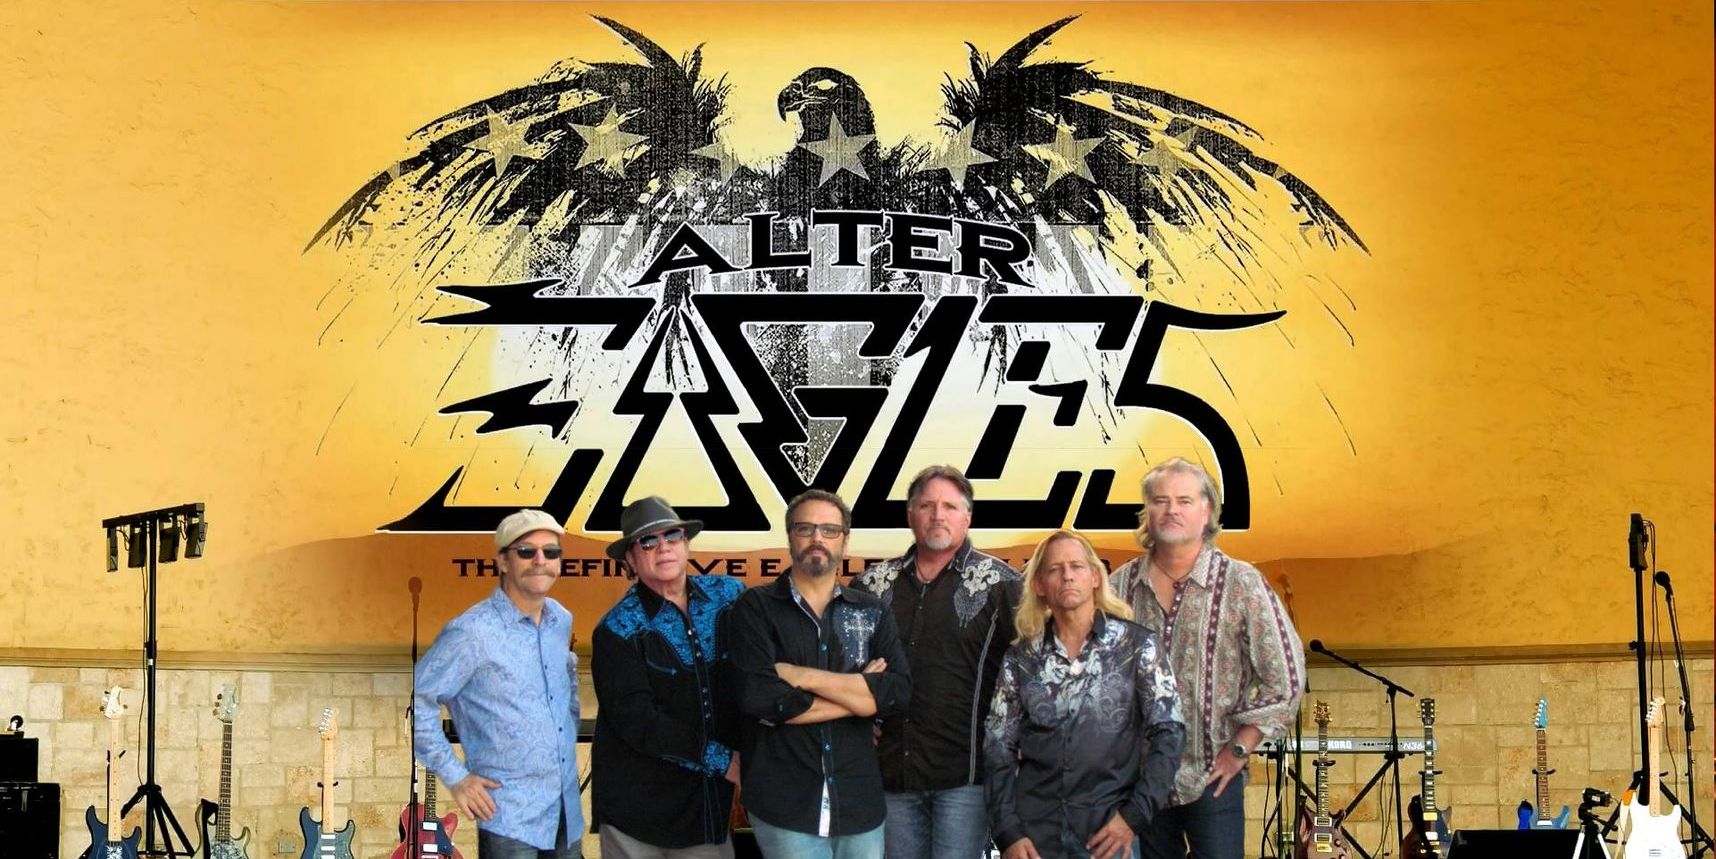 Alter Eagles (The Definitive Eagles Tribute Show) promotional image